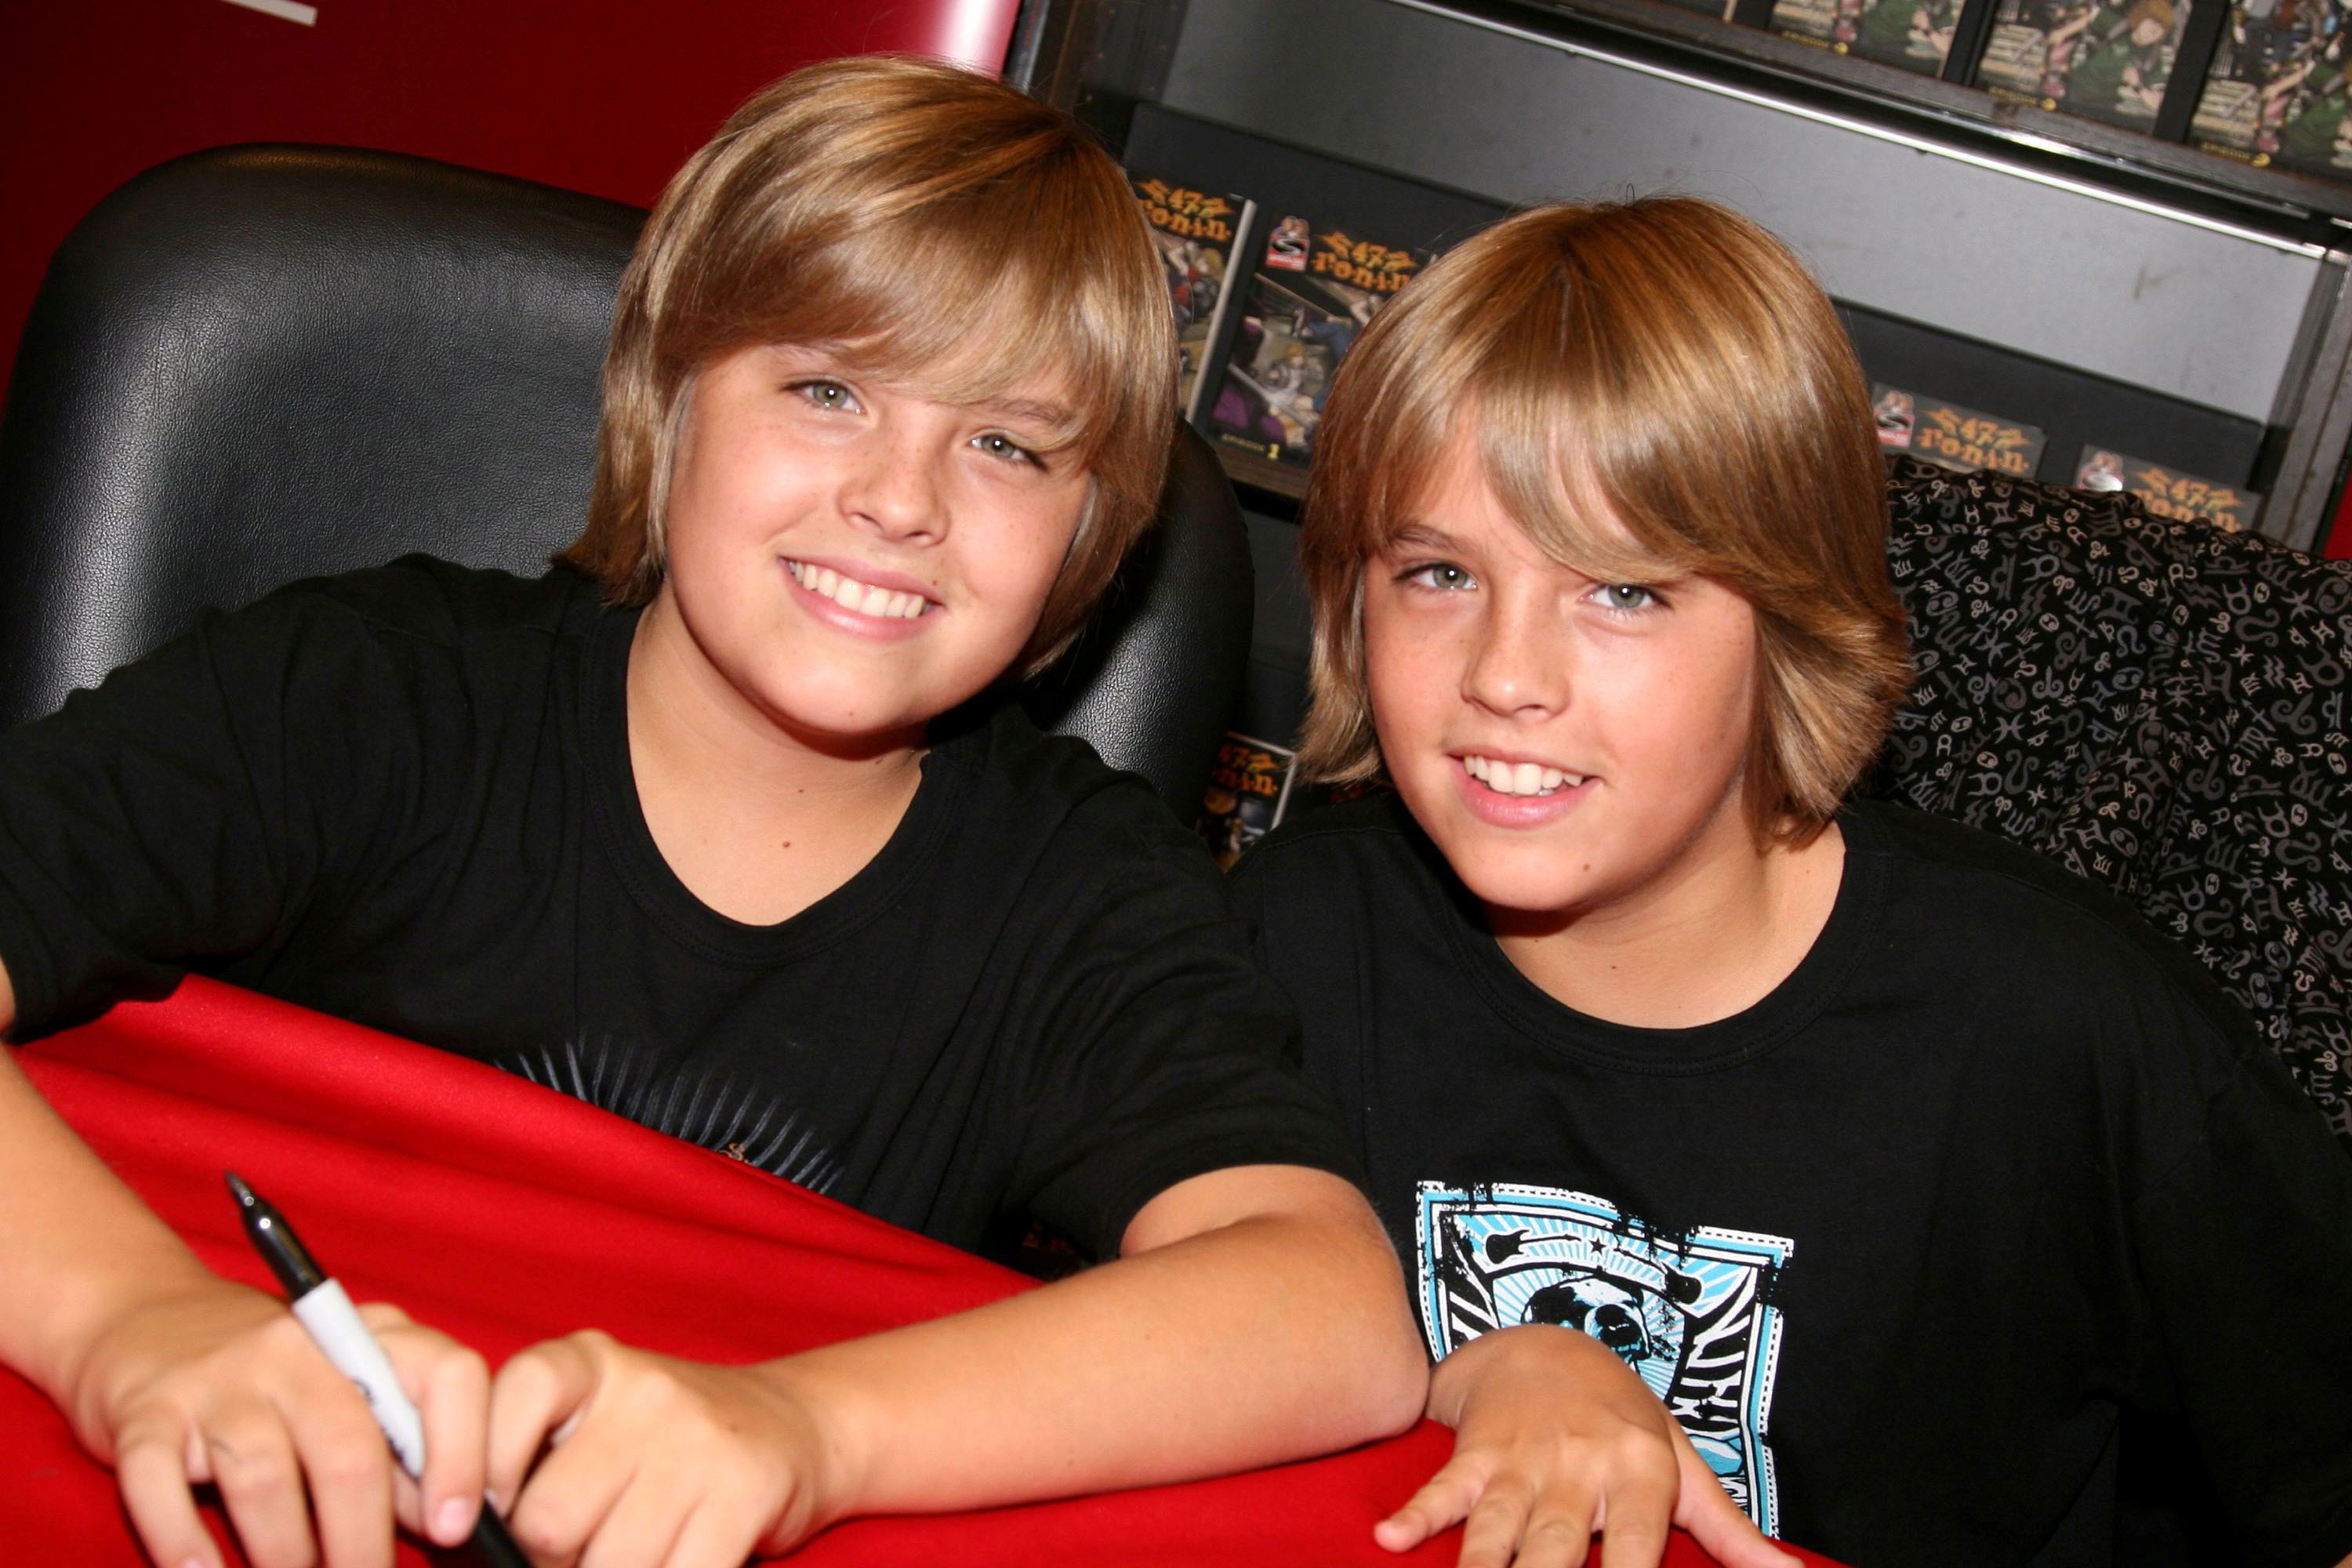 Cole and Dylan as kids smiling